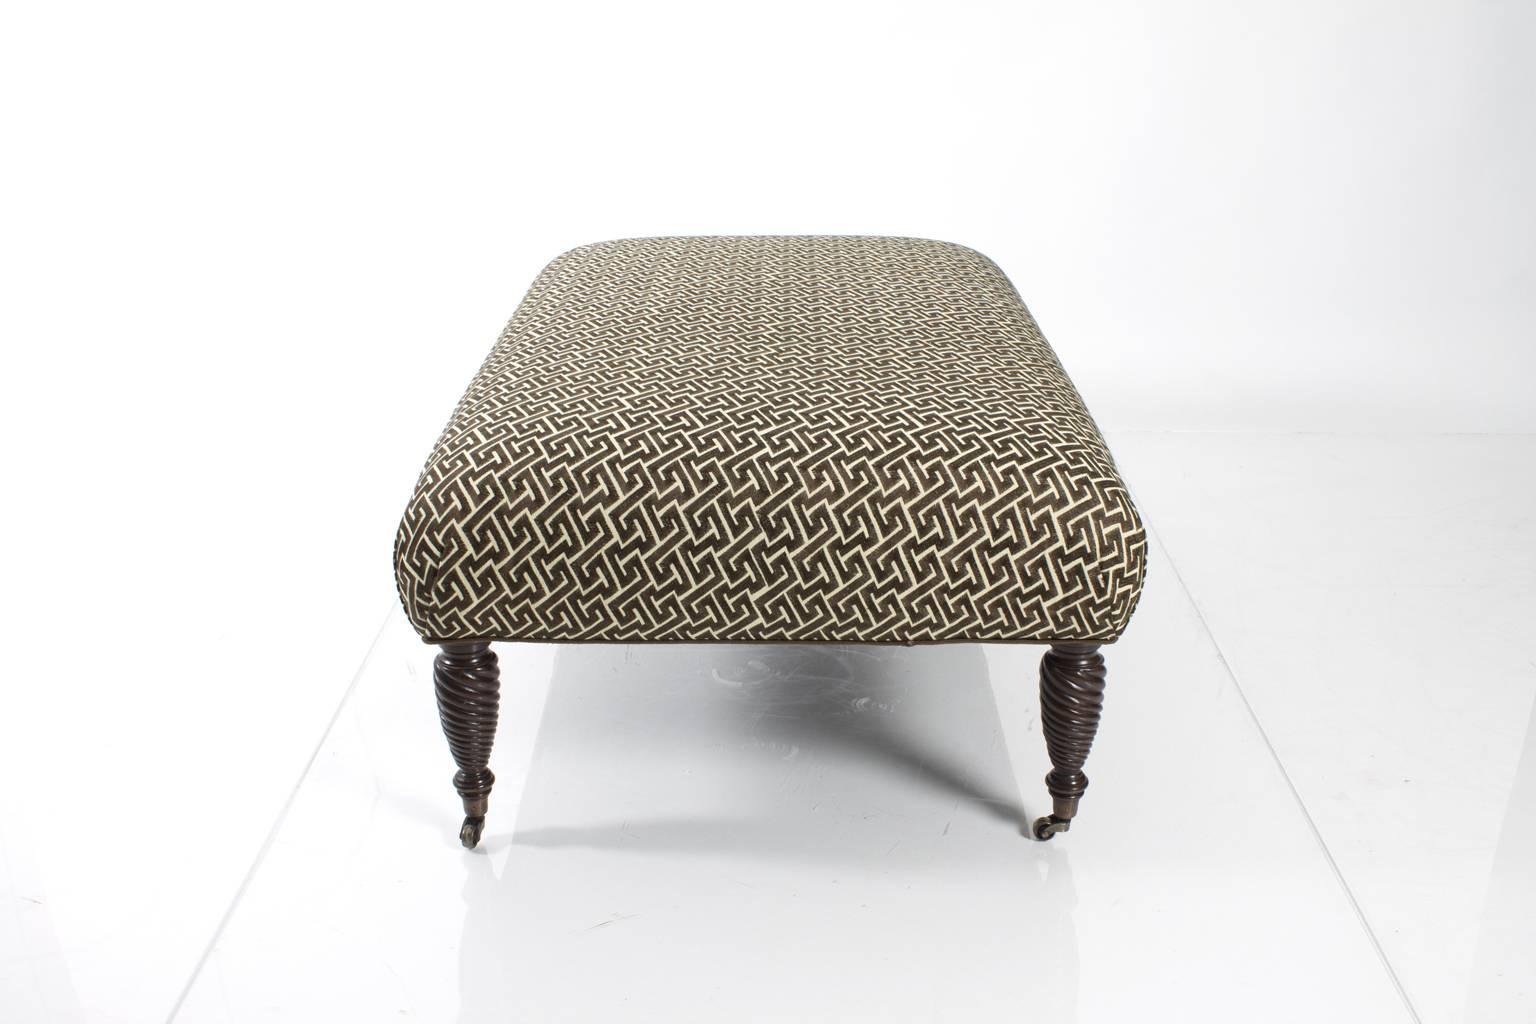 Ottoman upholstered in brown and white, geometric patterned fabric.
  